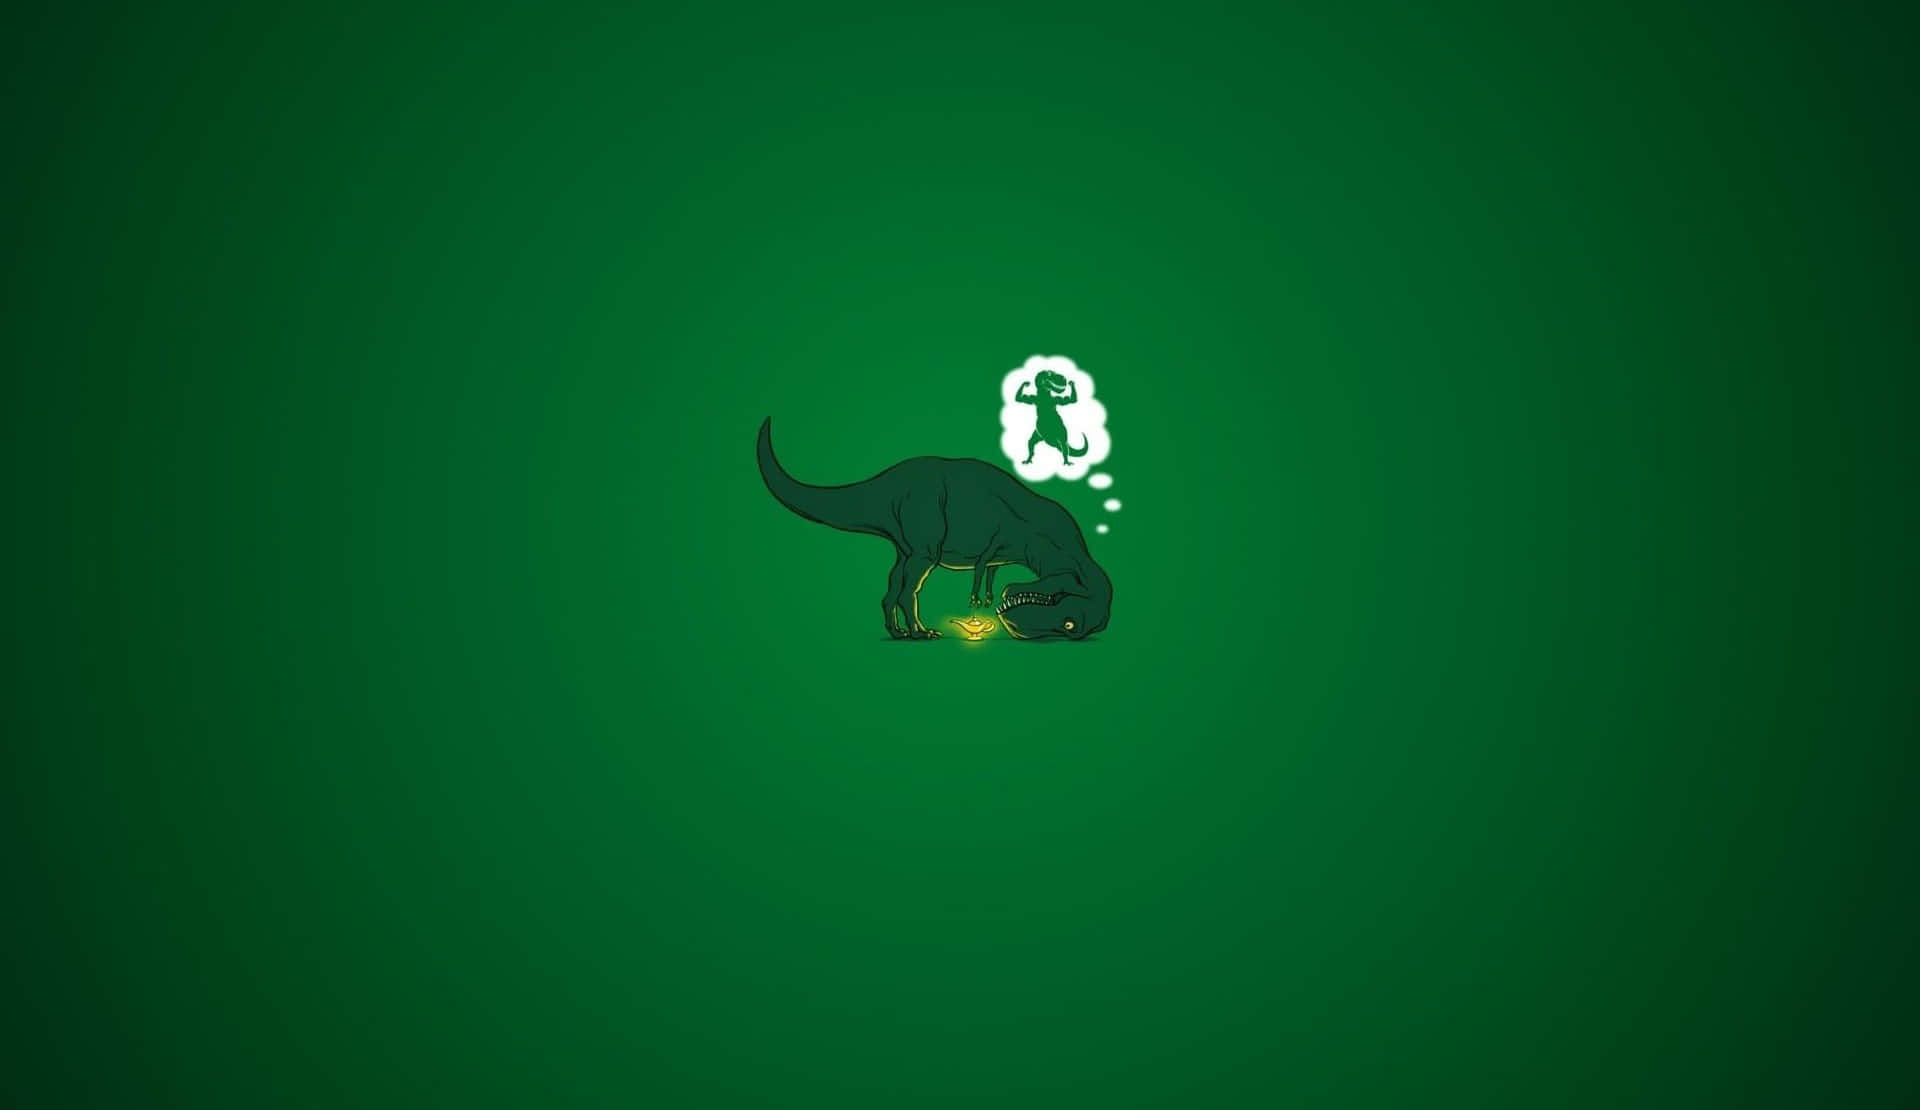 Adorable Green Dinosaur in a Playful Stance Wallpaper